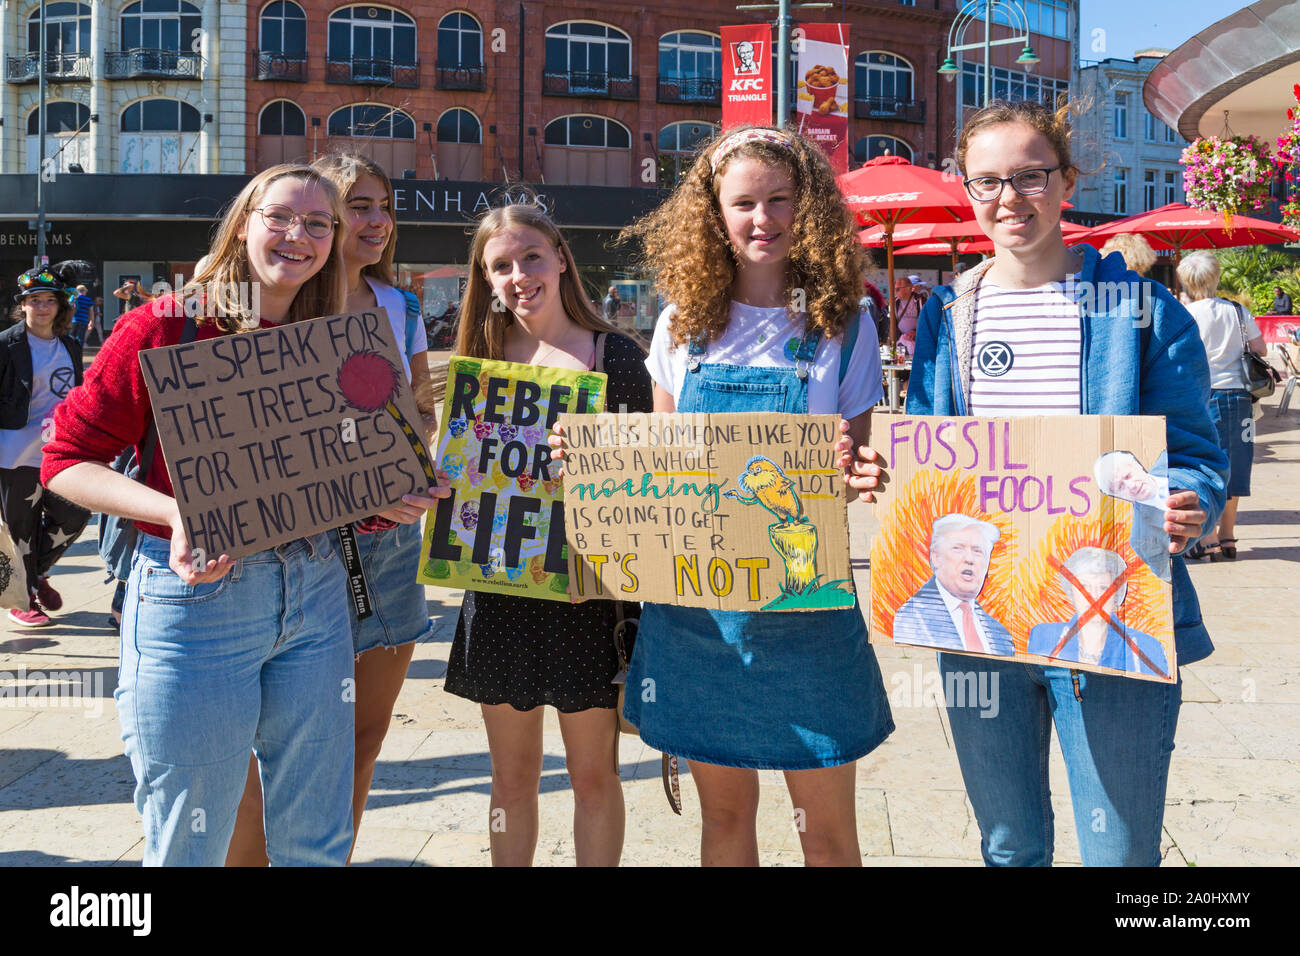 Bournemouth, Dorset UK. 20th September 2019. Protesters, young and old, gather in Bournemouth Square on a hot sunny day to protest against climate change and demand action against climate breakdown from government and businesses to do more. BCP (Bournemouth, Christchurch, Poole) Council have reportedly been threatened with legal action and could be taken to court until they produce proper timely climate change plans. we speak for the trees for the trees have no tongues, rebel for life, fossil fools, unless someone like you cares a whole awful lot nothi   Credit: Carolyn Jenkins/Alamy Live News Stock Photo